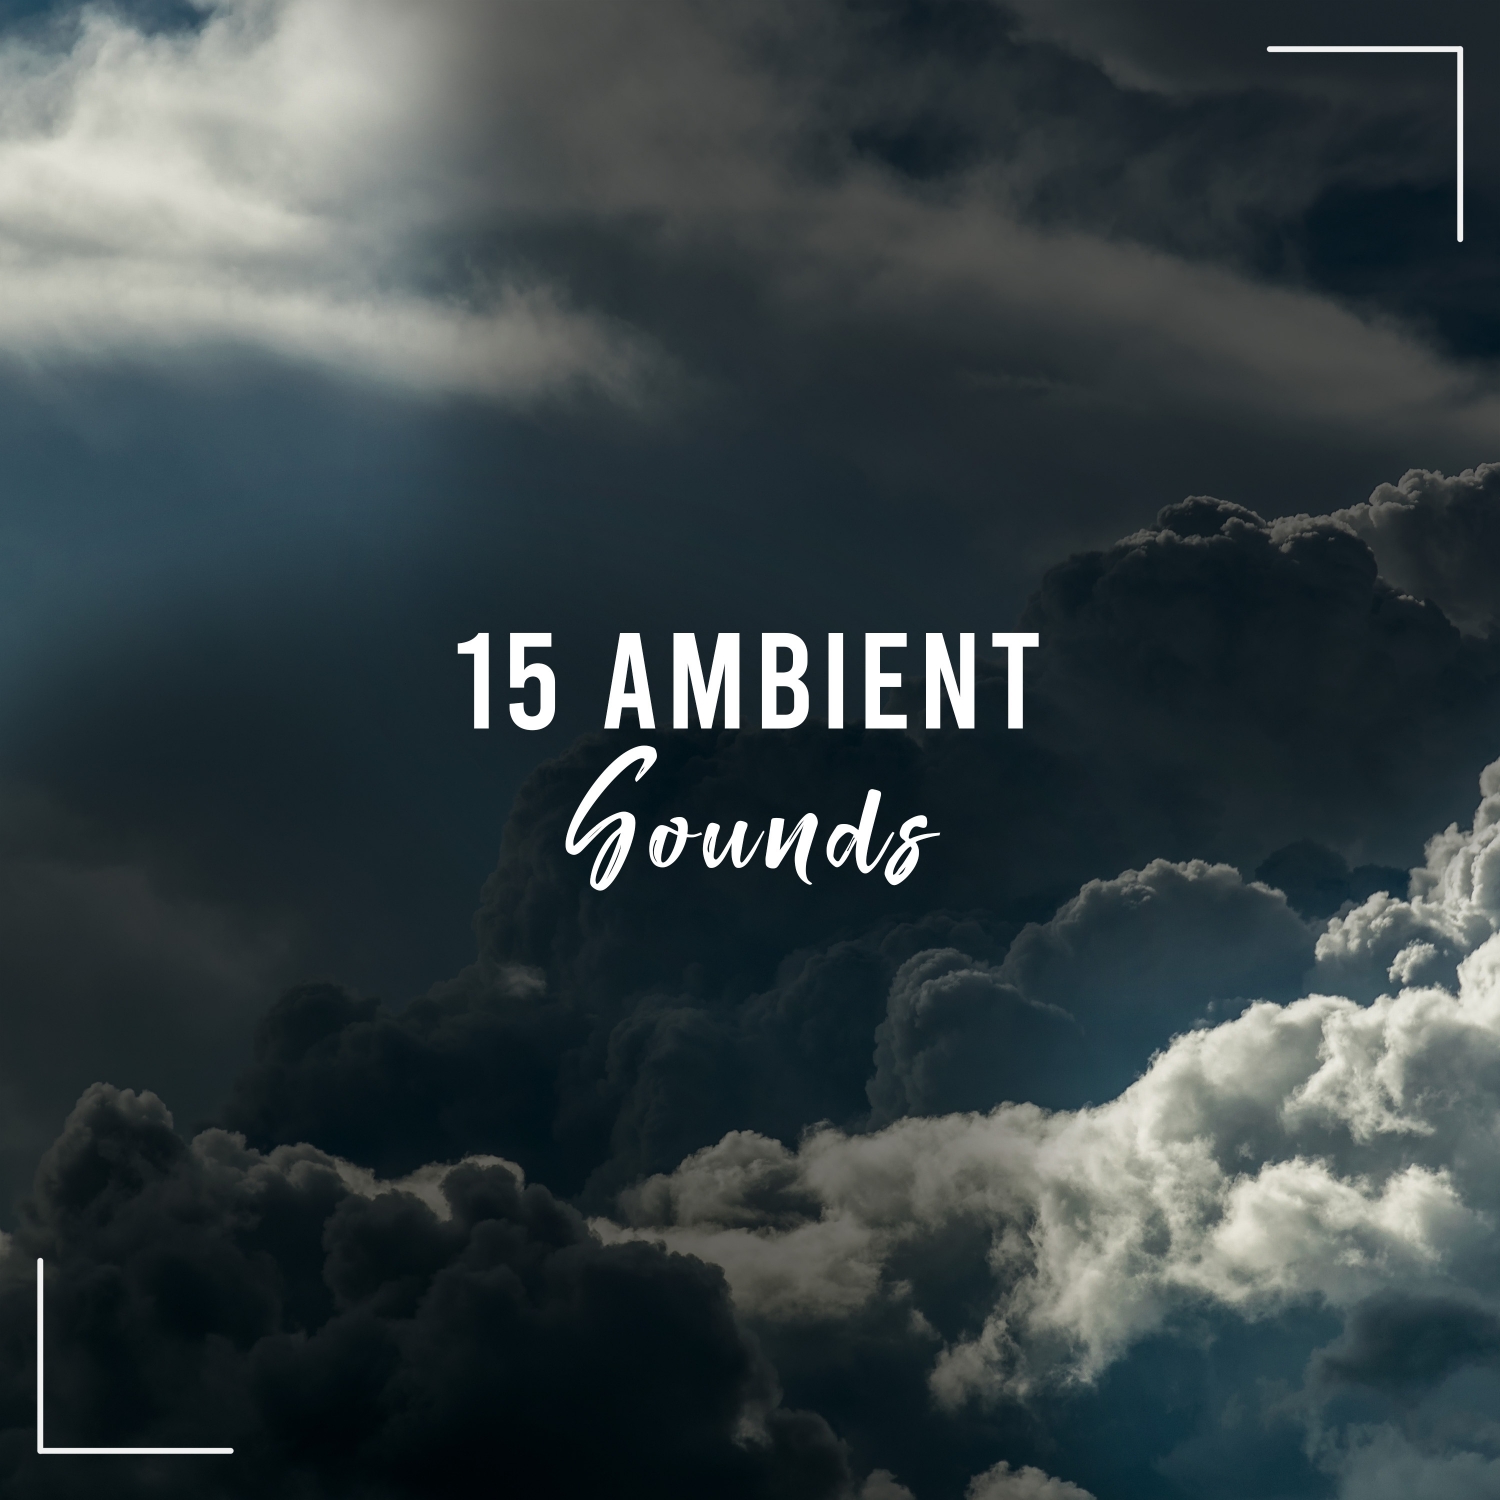 15 Ambient Rain Sounds, Running Water, Natural Rain, Meditation White Noise and Background Noise